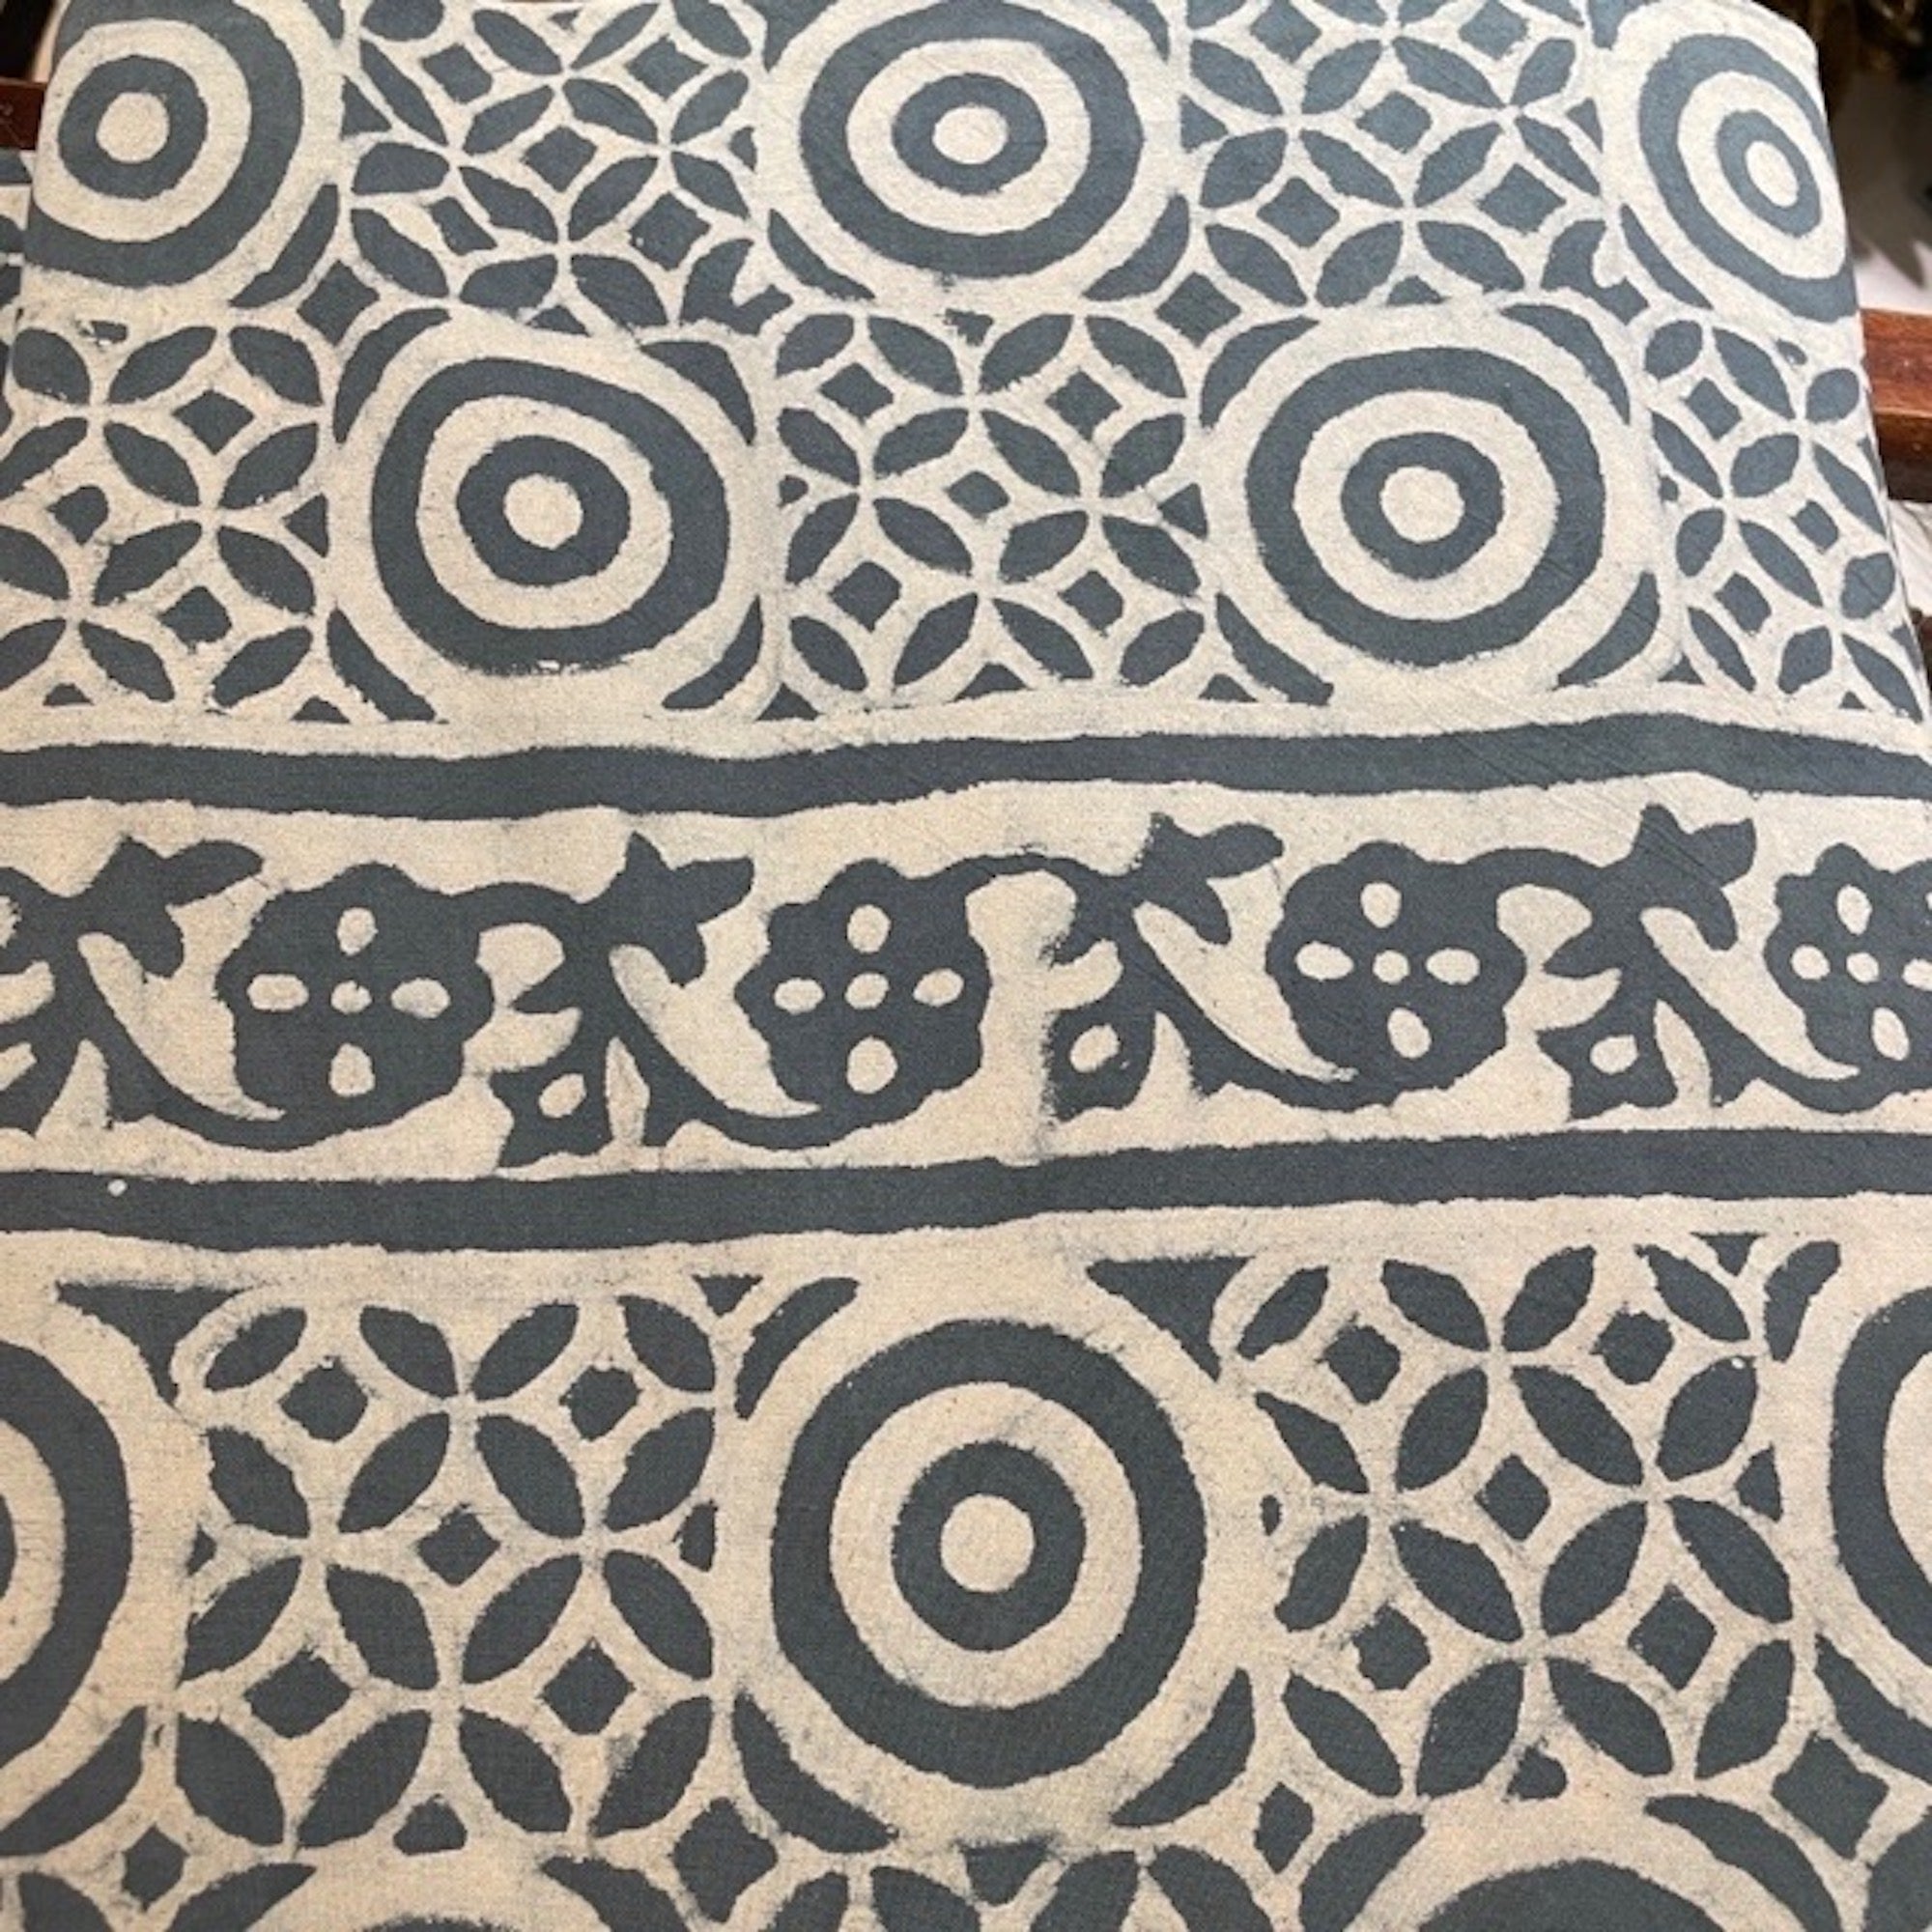 Queen Grey Block Print Bedcover Collection - Vintage India NYC